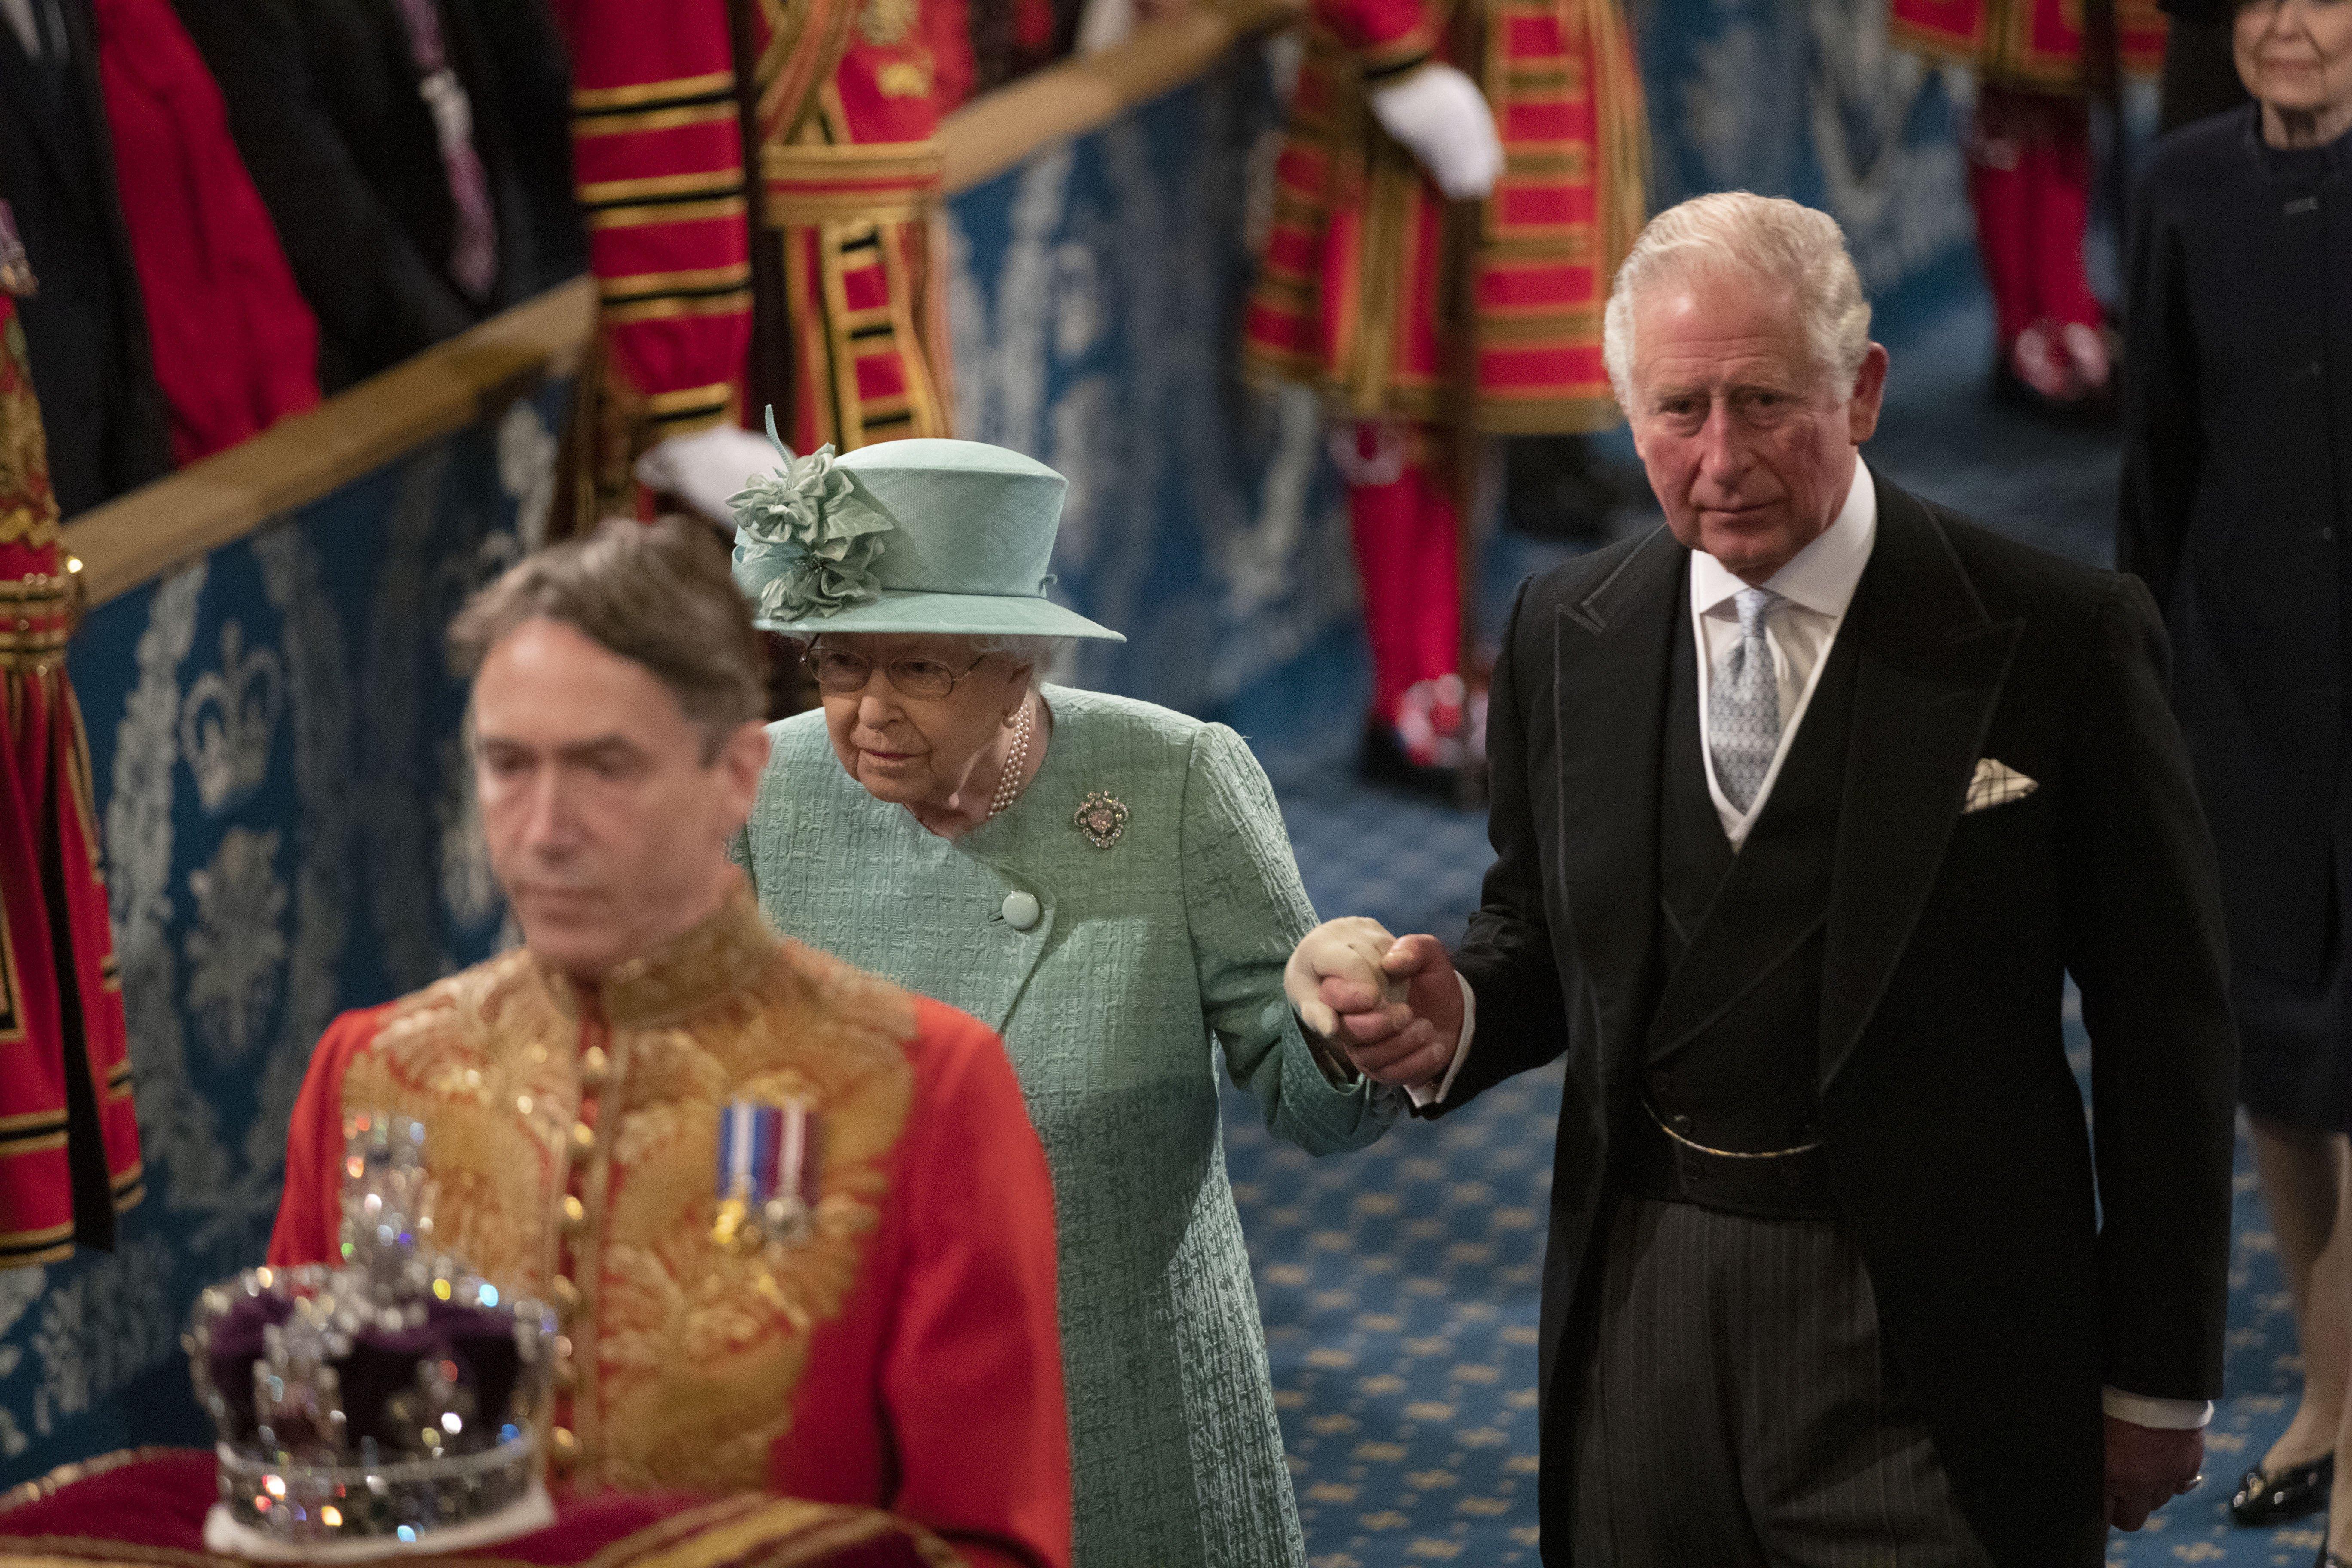 Queen Elizabeth II, accompanied by the Prince of Wales, proceed through the Royal Gallery before delivering the Queen's Speech during the State Opening of Parliament in the House of Lords at the Palace of Westminster in London